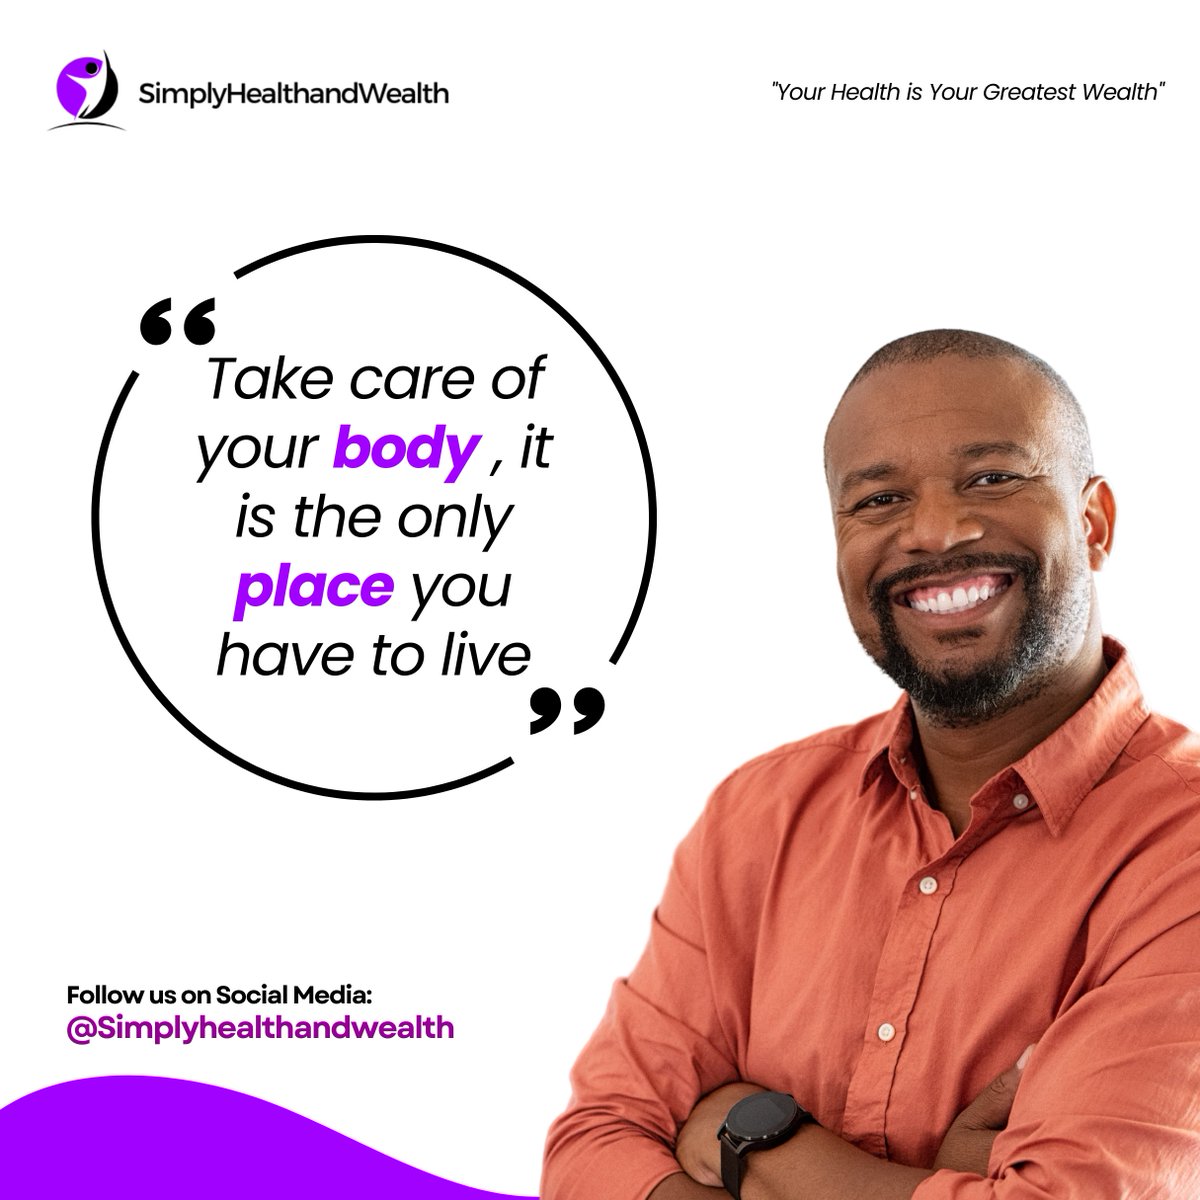 How well do you take good care of your body?

This is a reminder that your body is the only place you have to live.

Take good care of yourself.

#simplyhealthandwealth #nigeriaentrepreneurs #ukentrepreneurs #entrepreneursinlagos #healthiswealth #nbctribe #healthcoach